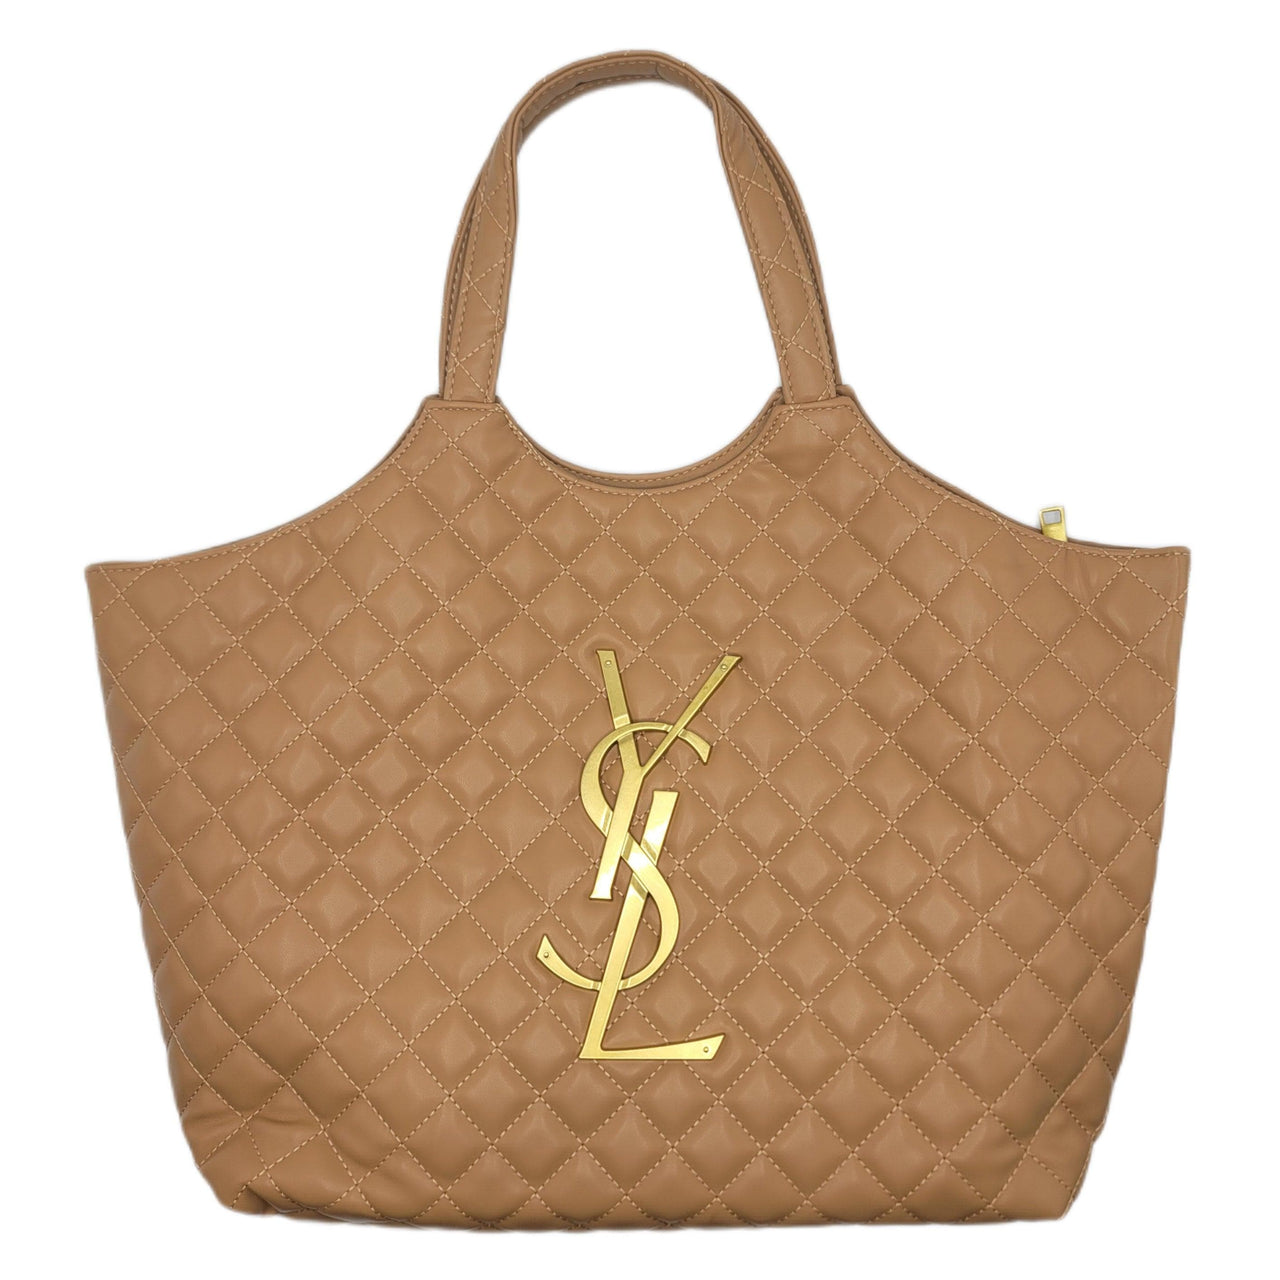 The Bag Couture Handbags, Wallets & Cases YSL iCare Quilted Tote Bag Black/White/Beige